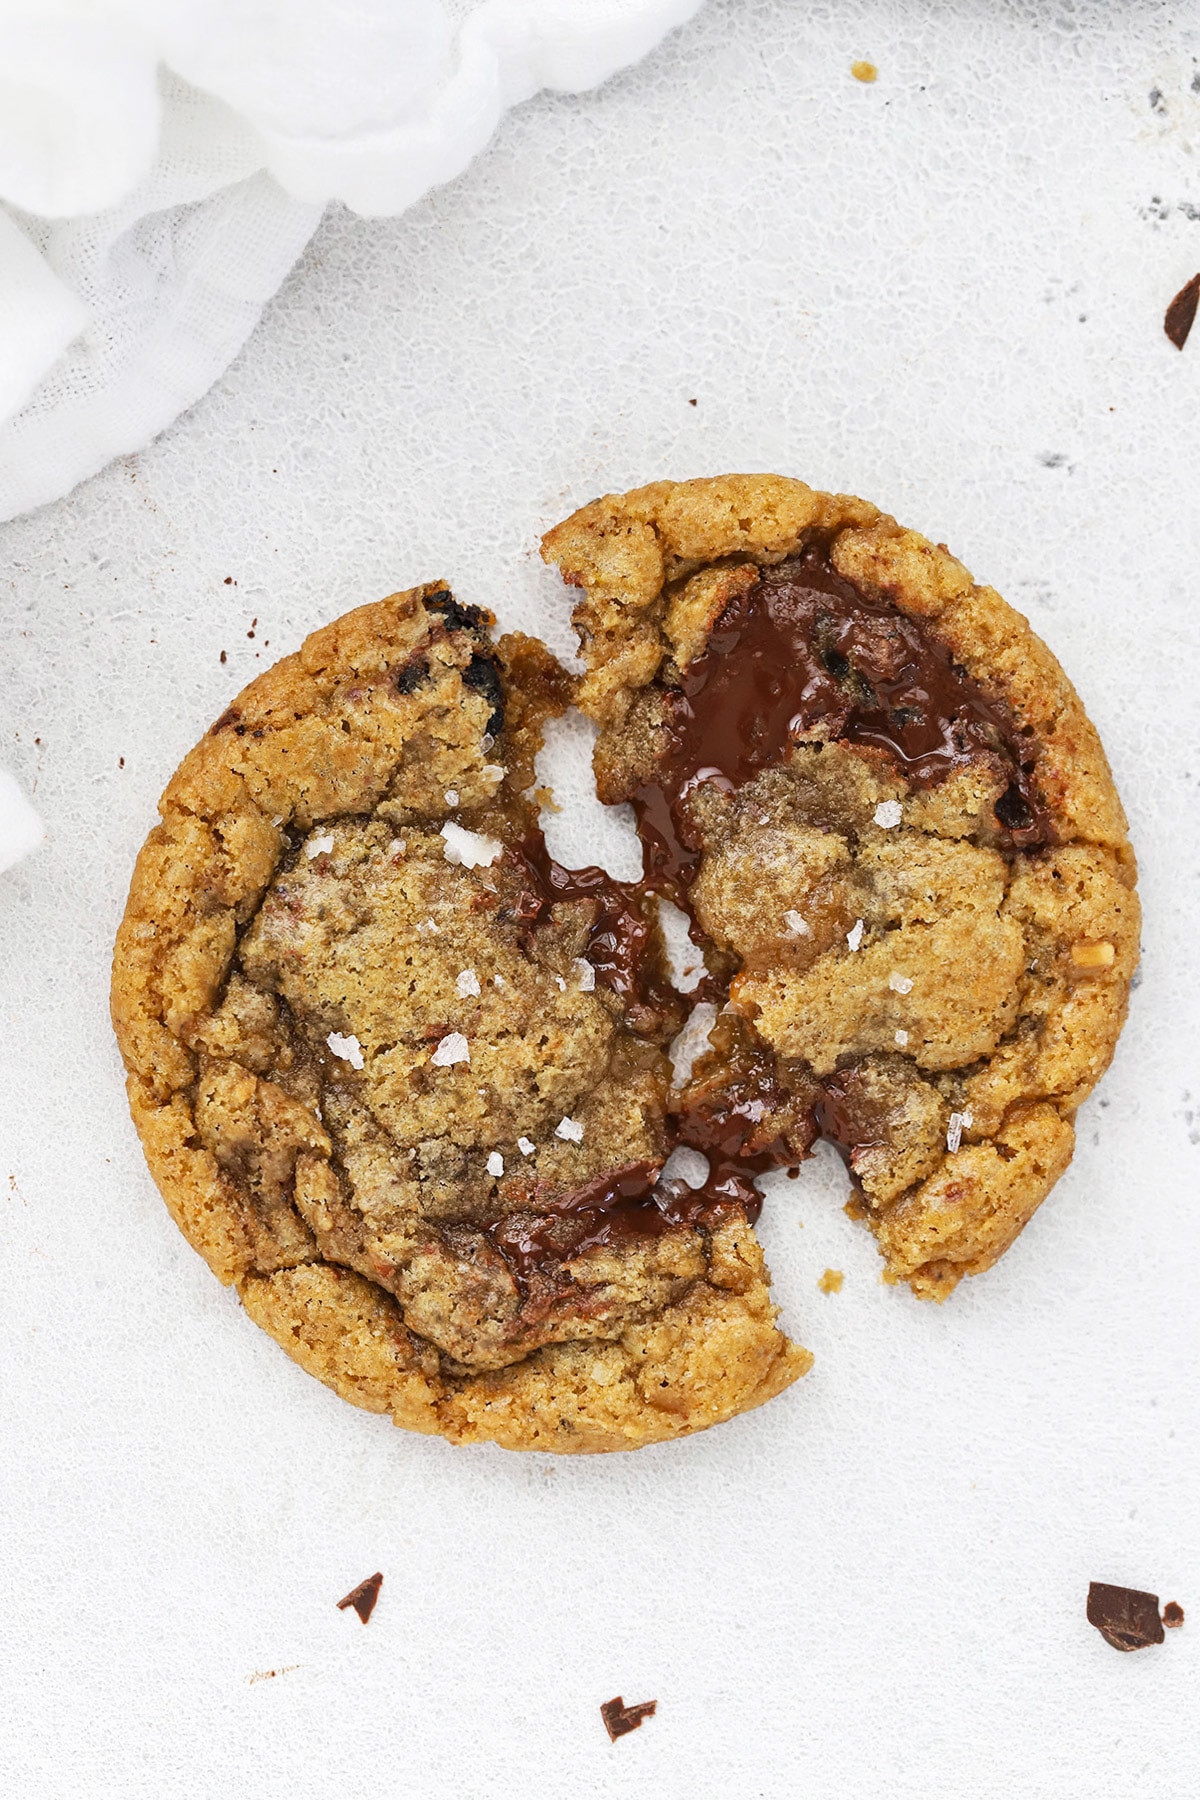 Overhead image of a gooey gluten-free brown butter toffee chocolate chip cookie being pulled apart